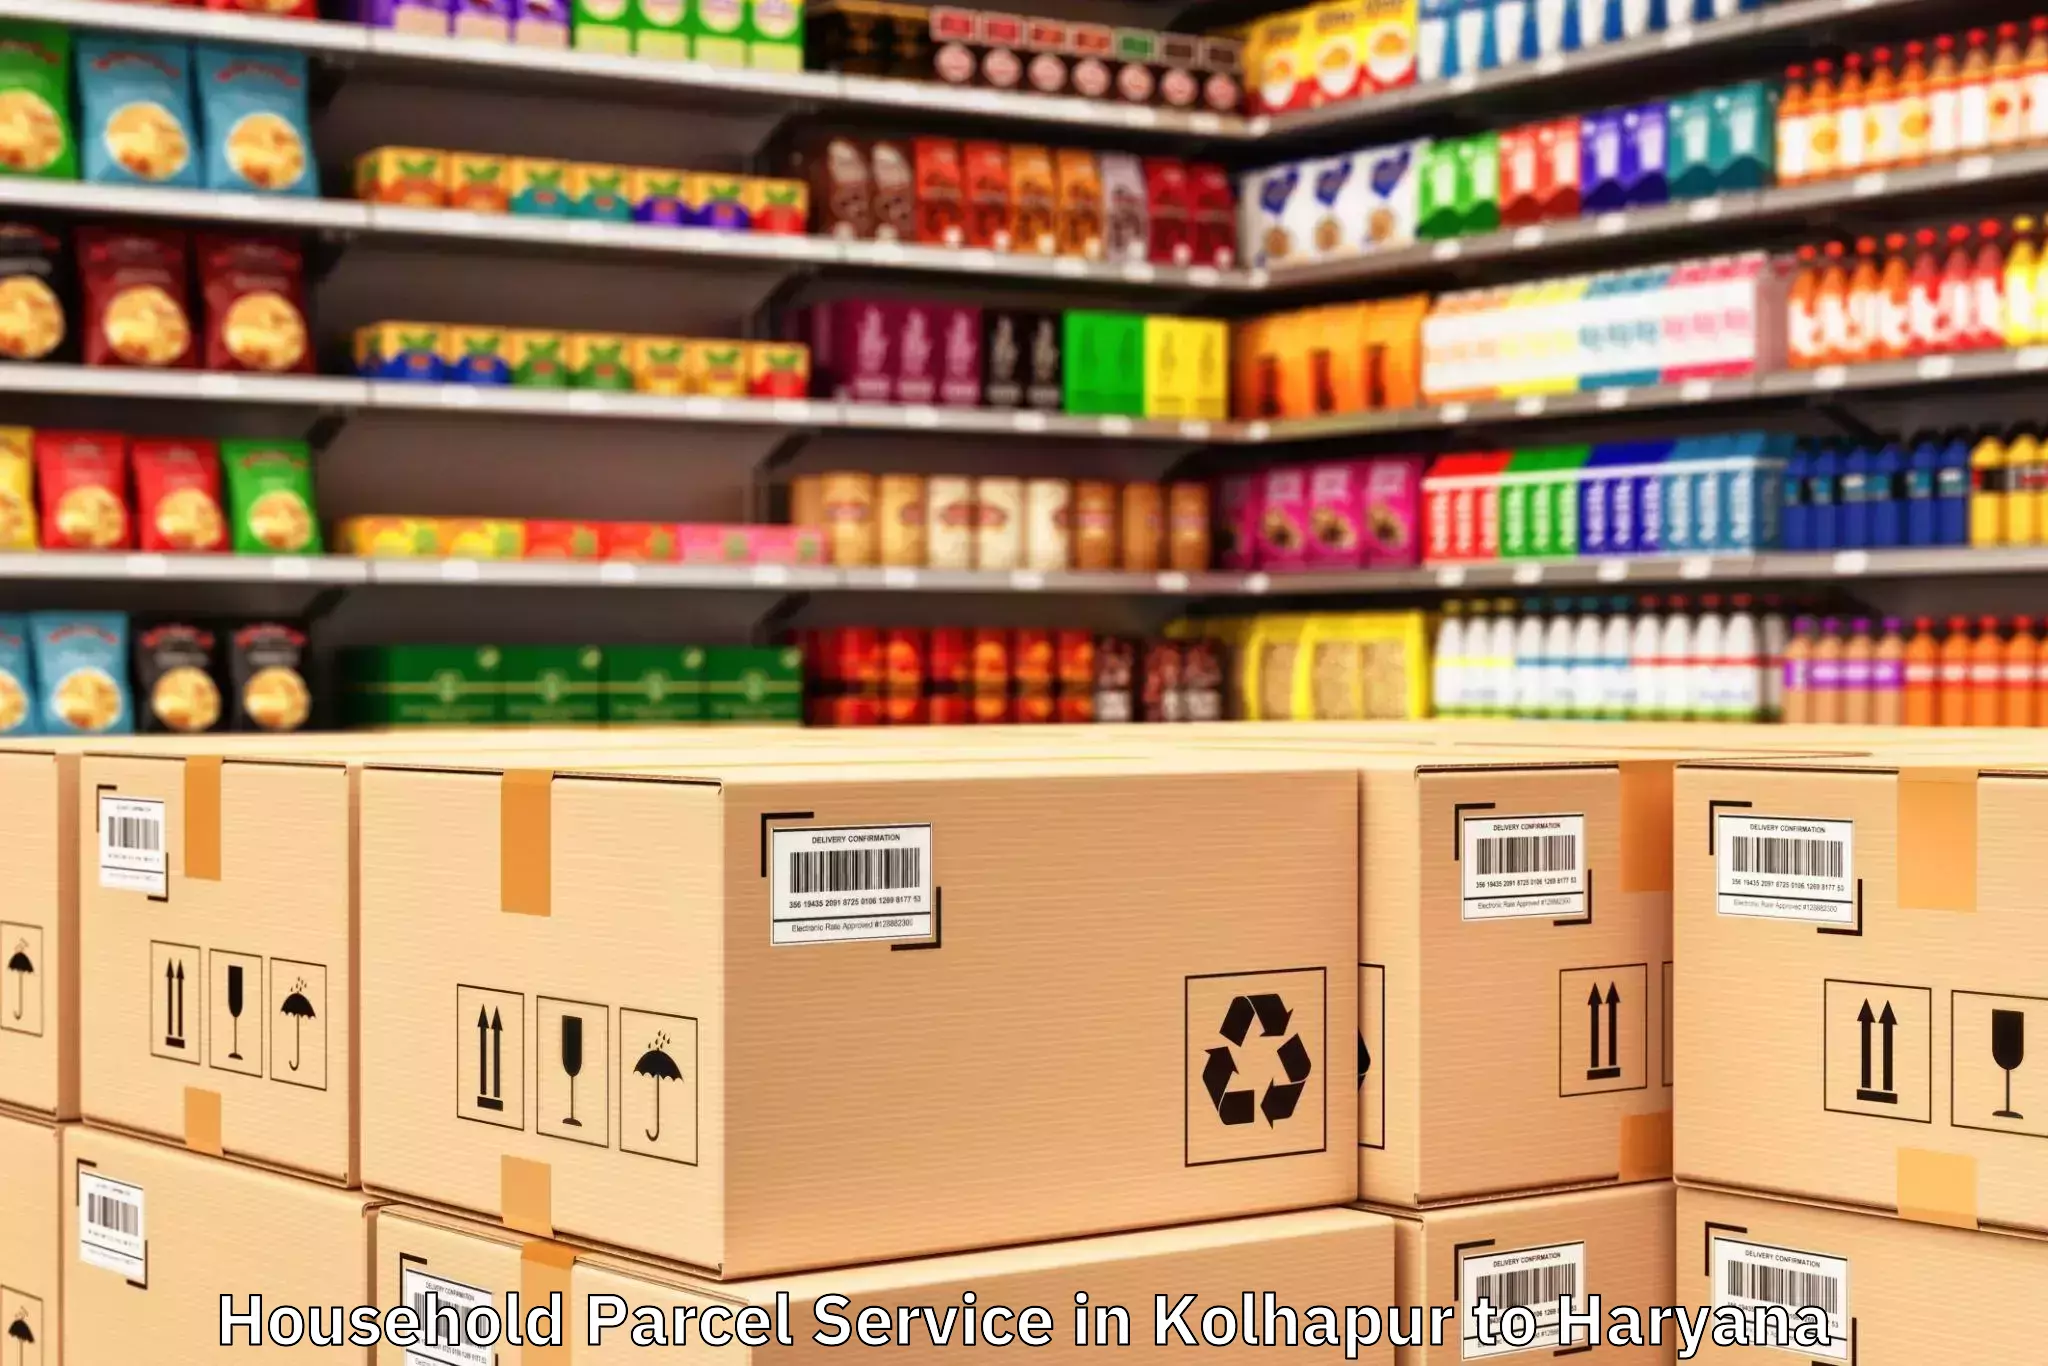 Comprehensive Kolhapur to Gurgaon Central Mall Household Parcel Service